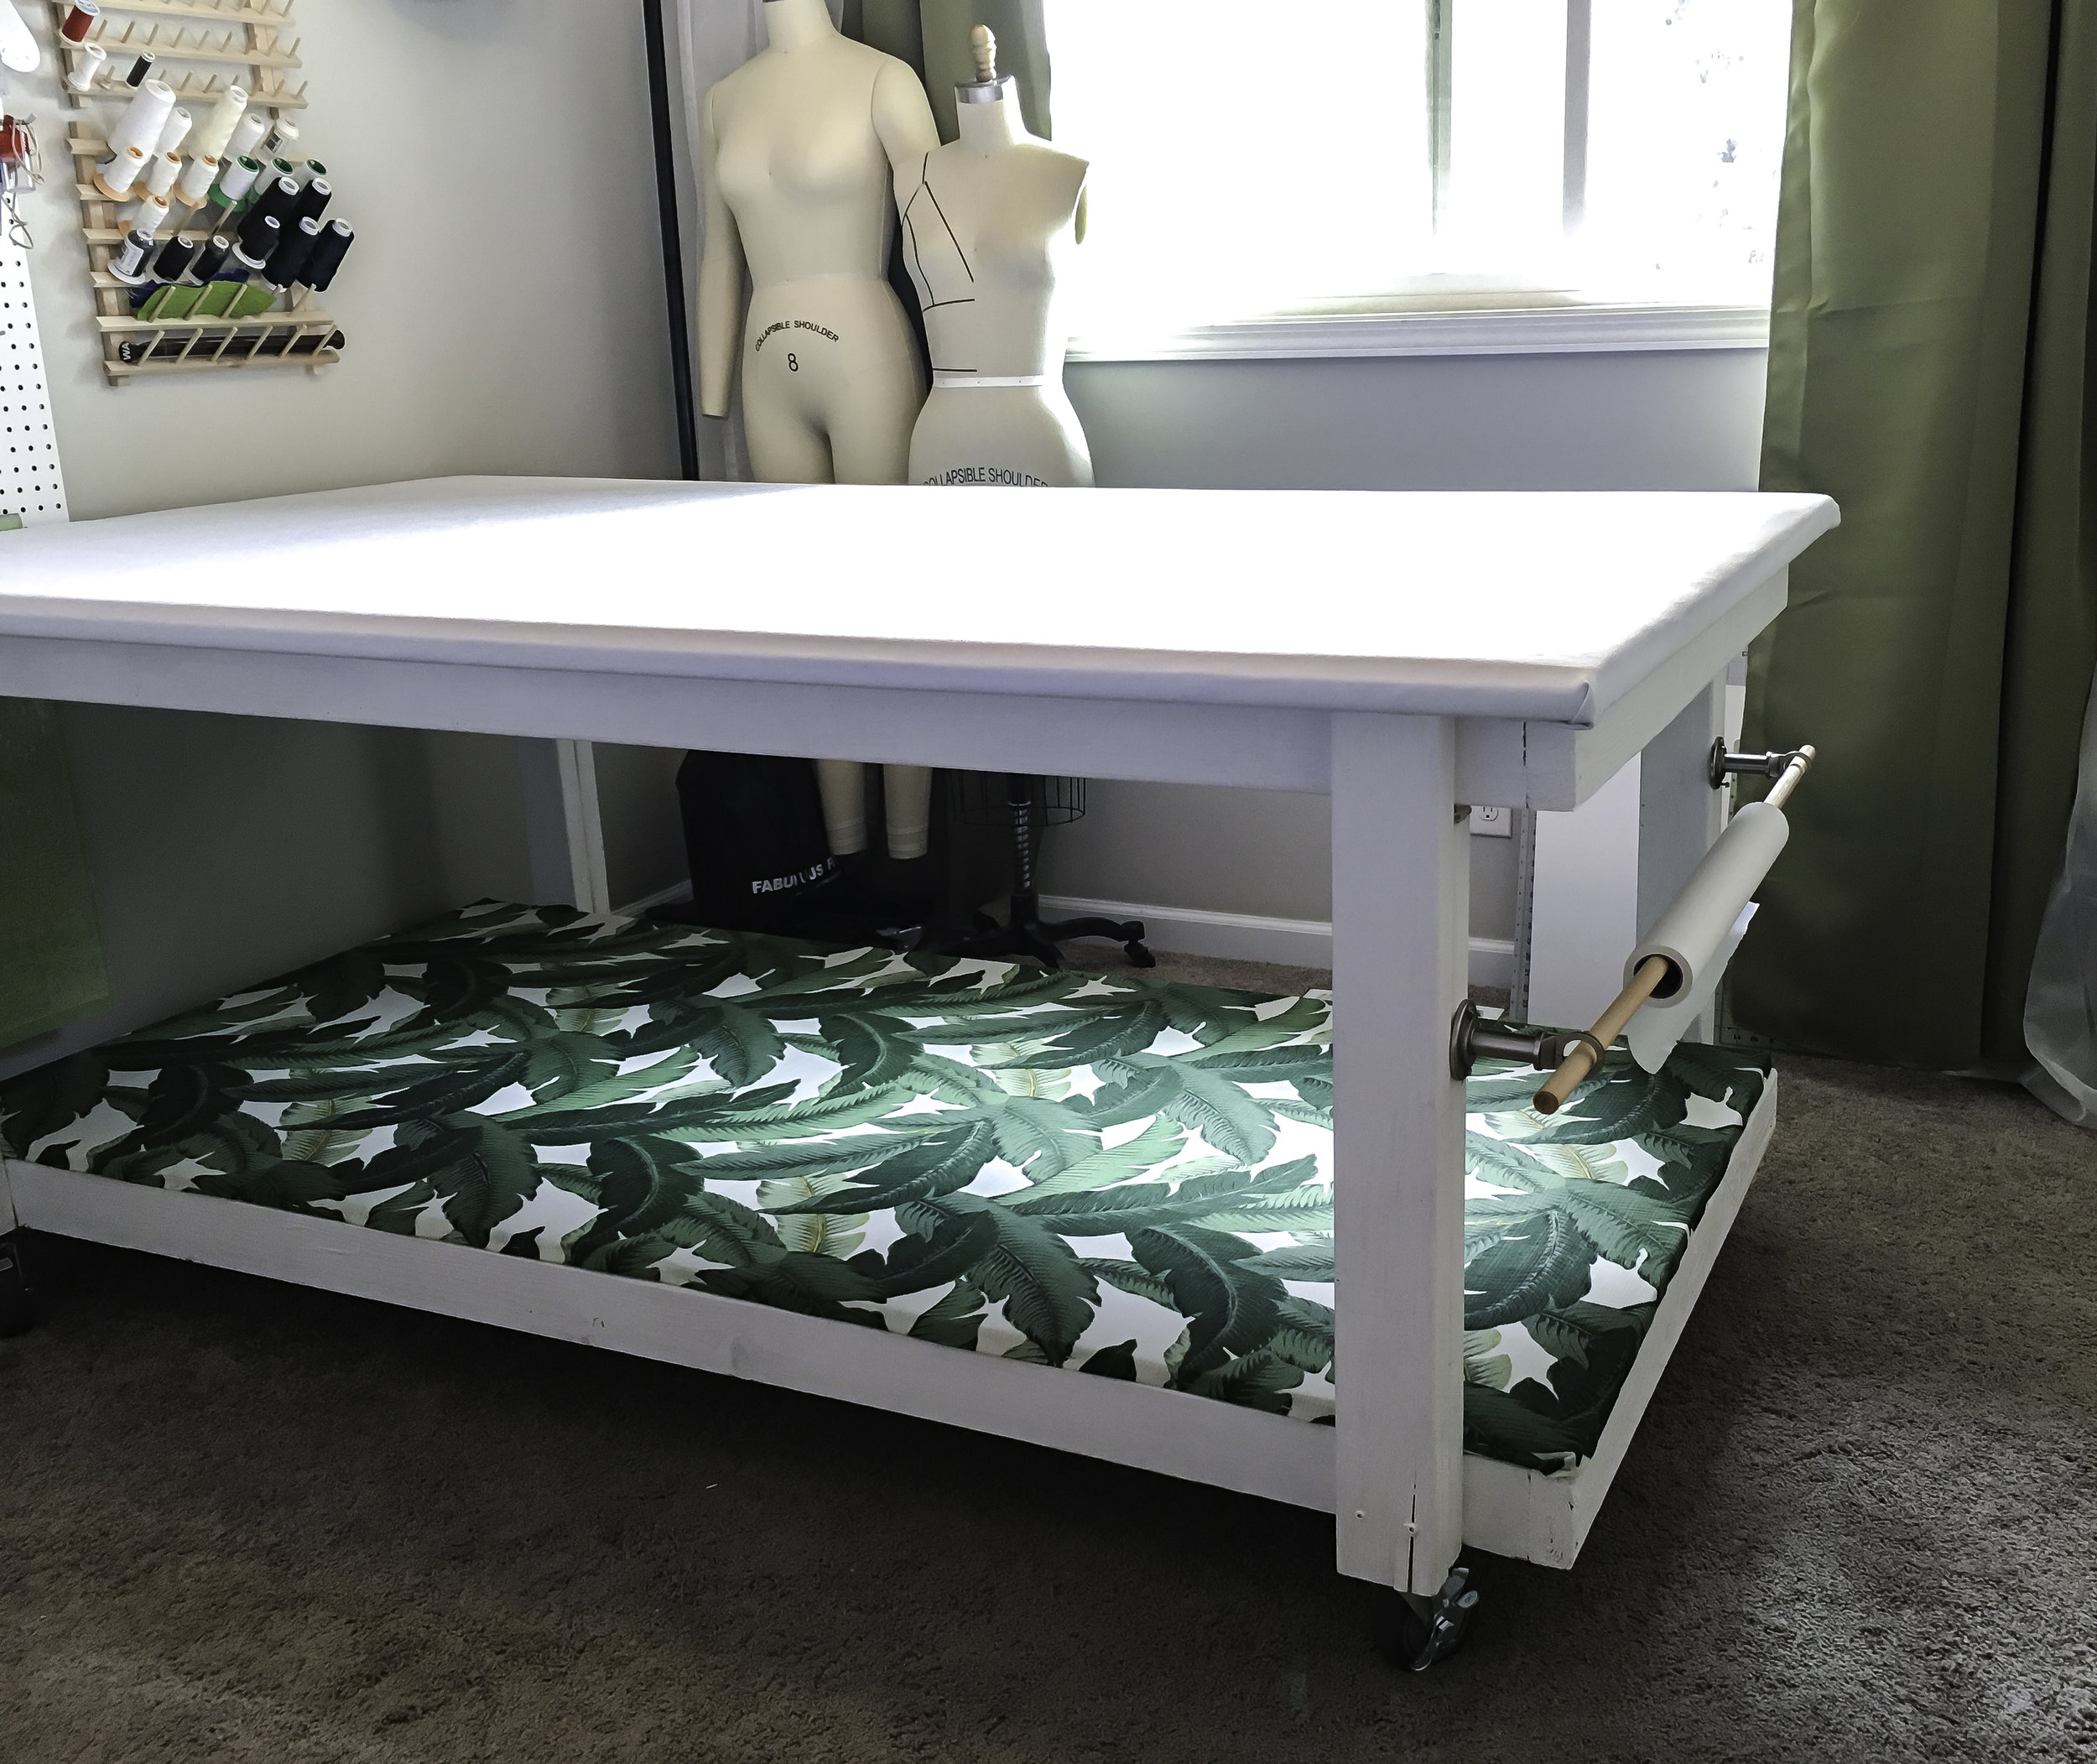 My Sewing Room Makeover, Part 2: Ironing Station and Work Table